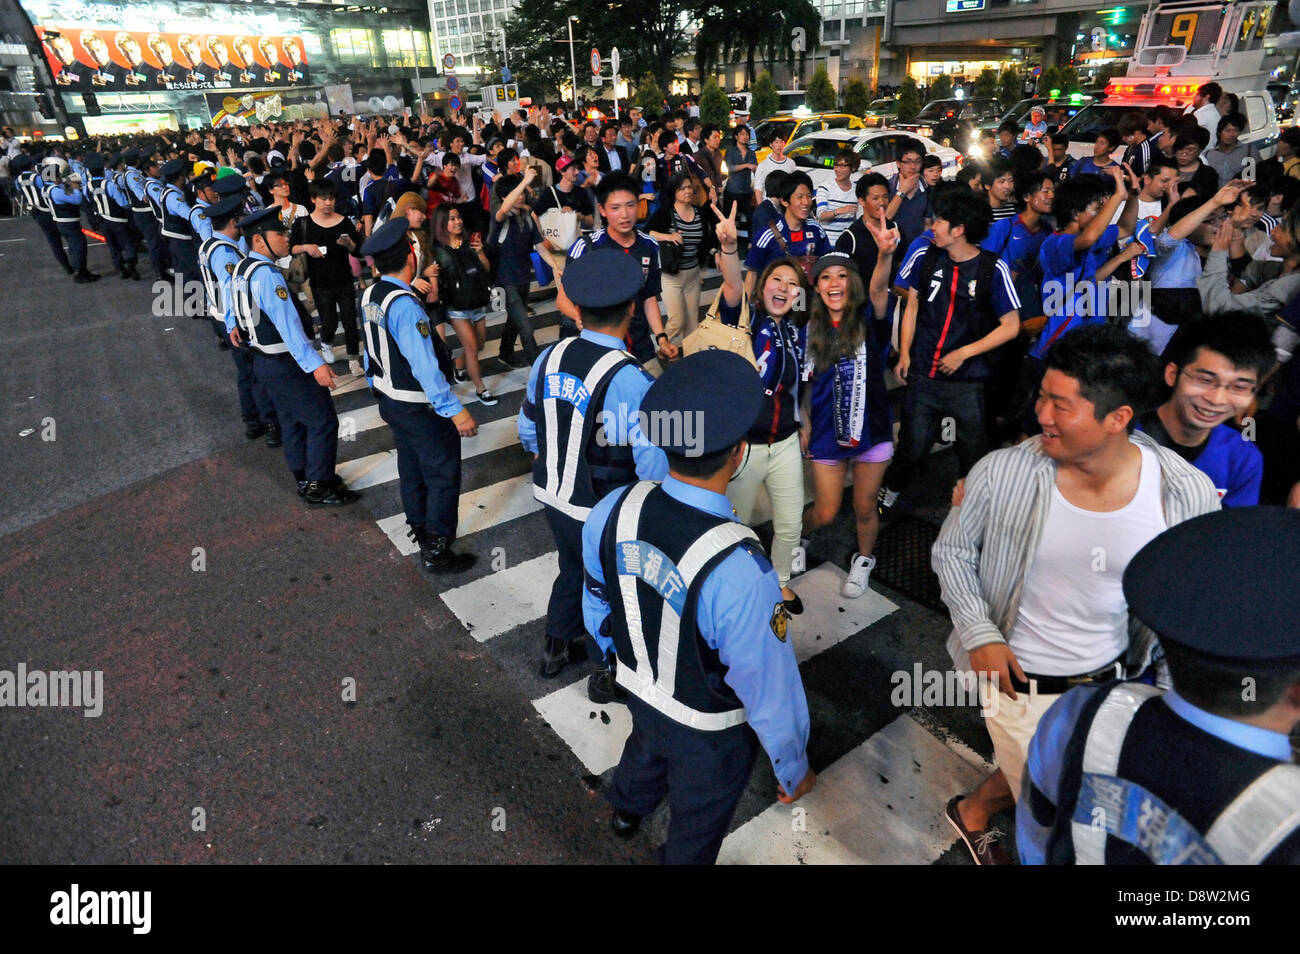 Saitama, Japan. 4th June 2013. June 4th, 2013 : Tokyo, Japan - Fans celebrated the Japan National Soccer team, which had a game of the final Asian qualifiers for the 2014 World Cup against Australia and cleared it, as police officers regulate them in front of Shibuya Station, Shibuya, Tokyo Japan on June 4, 2013.  (Photo by Koichiro Suzuki/AFLO/Alamy Live News) Stock Photo